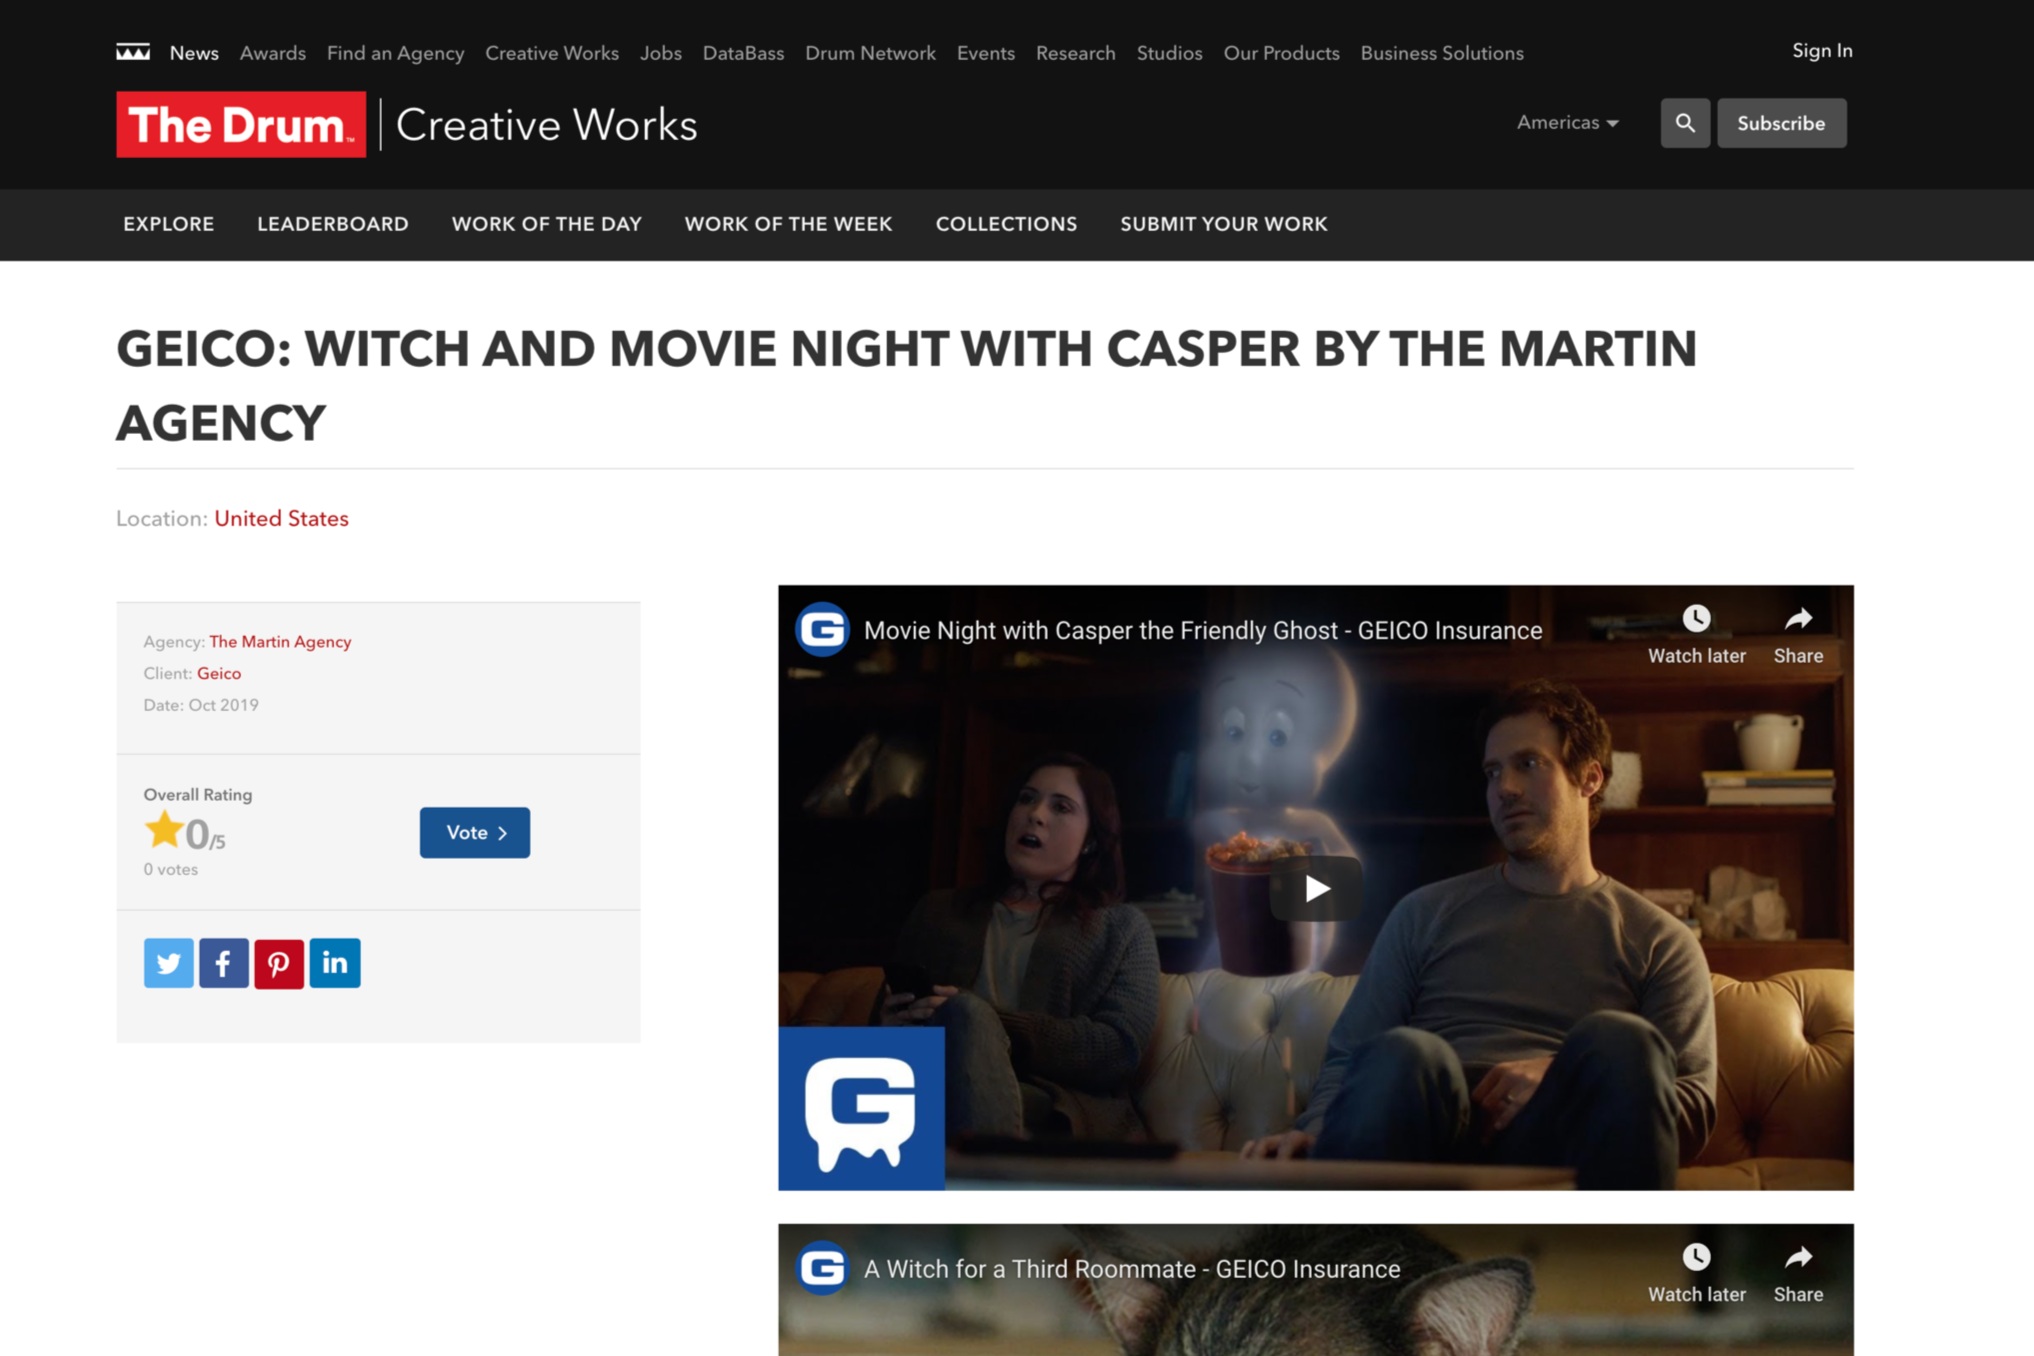 GEICO: WITCH AND MOVIE NIGHT WITH CASPER BY THE MARTIN AGENCY